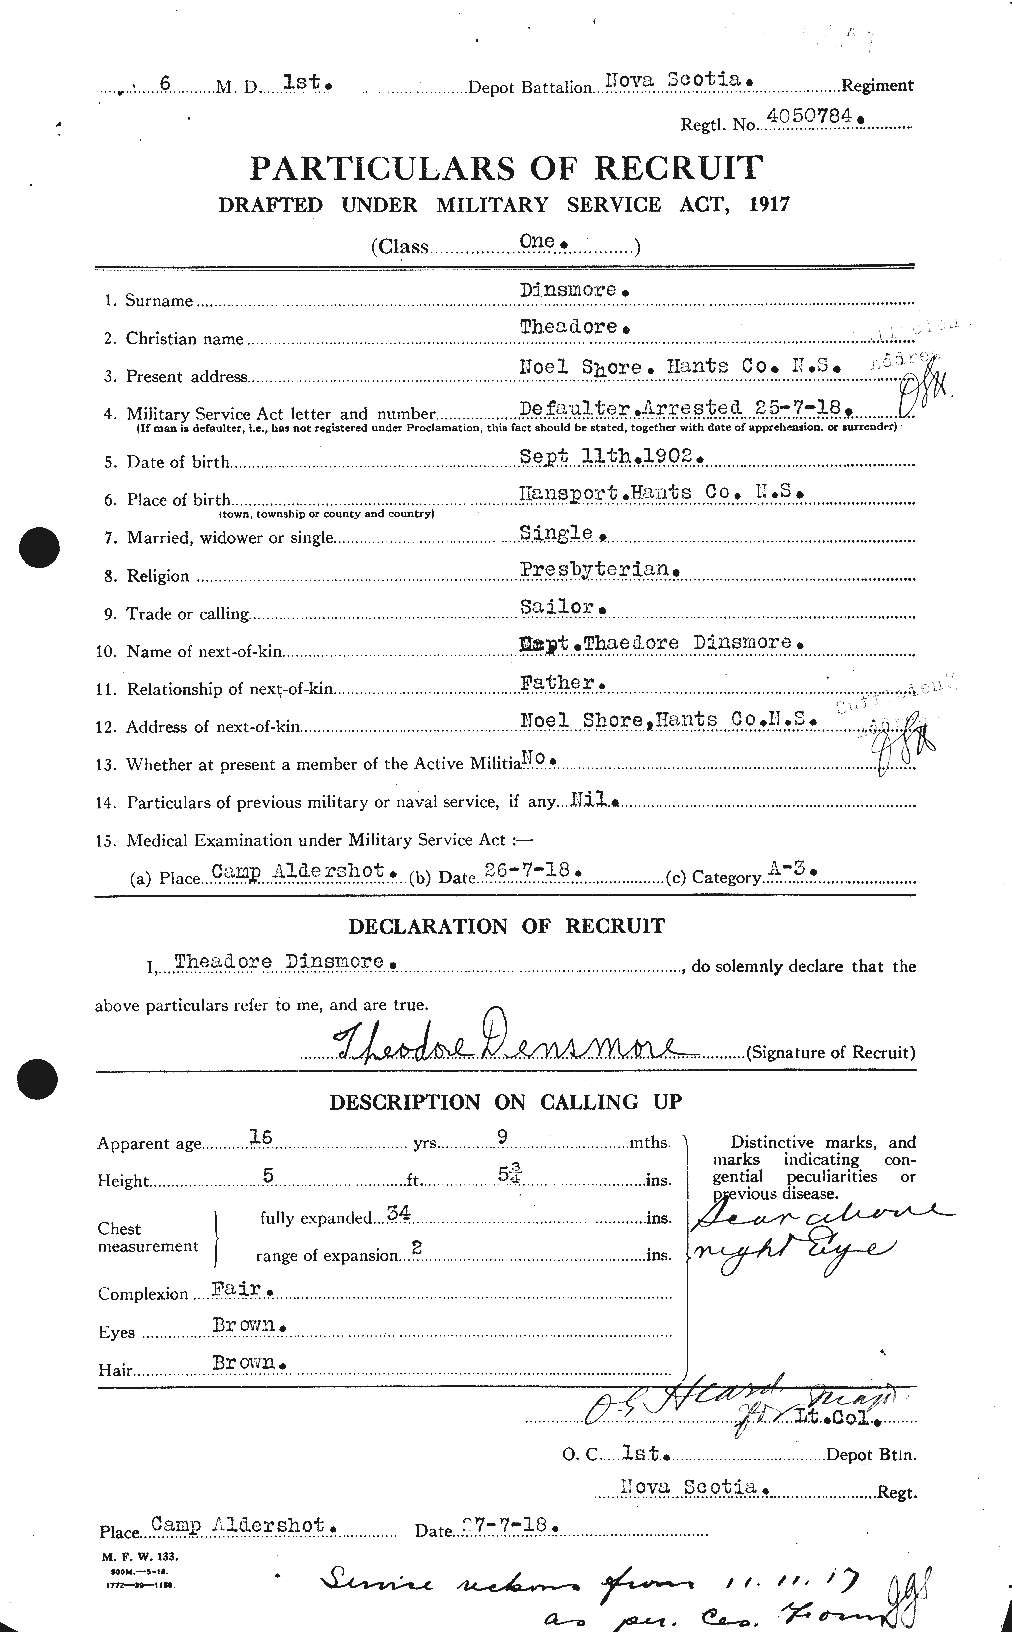 Personnel Records of the First World War - CEF 286439a